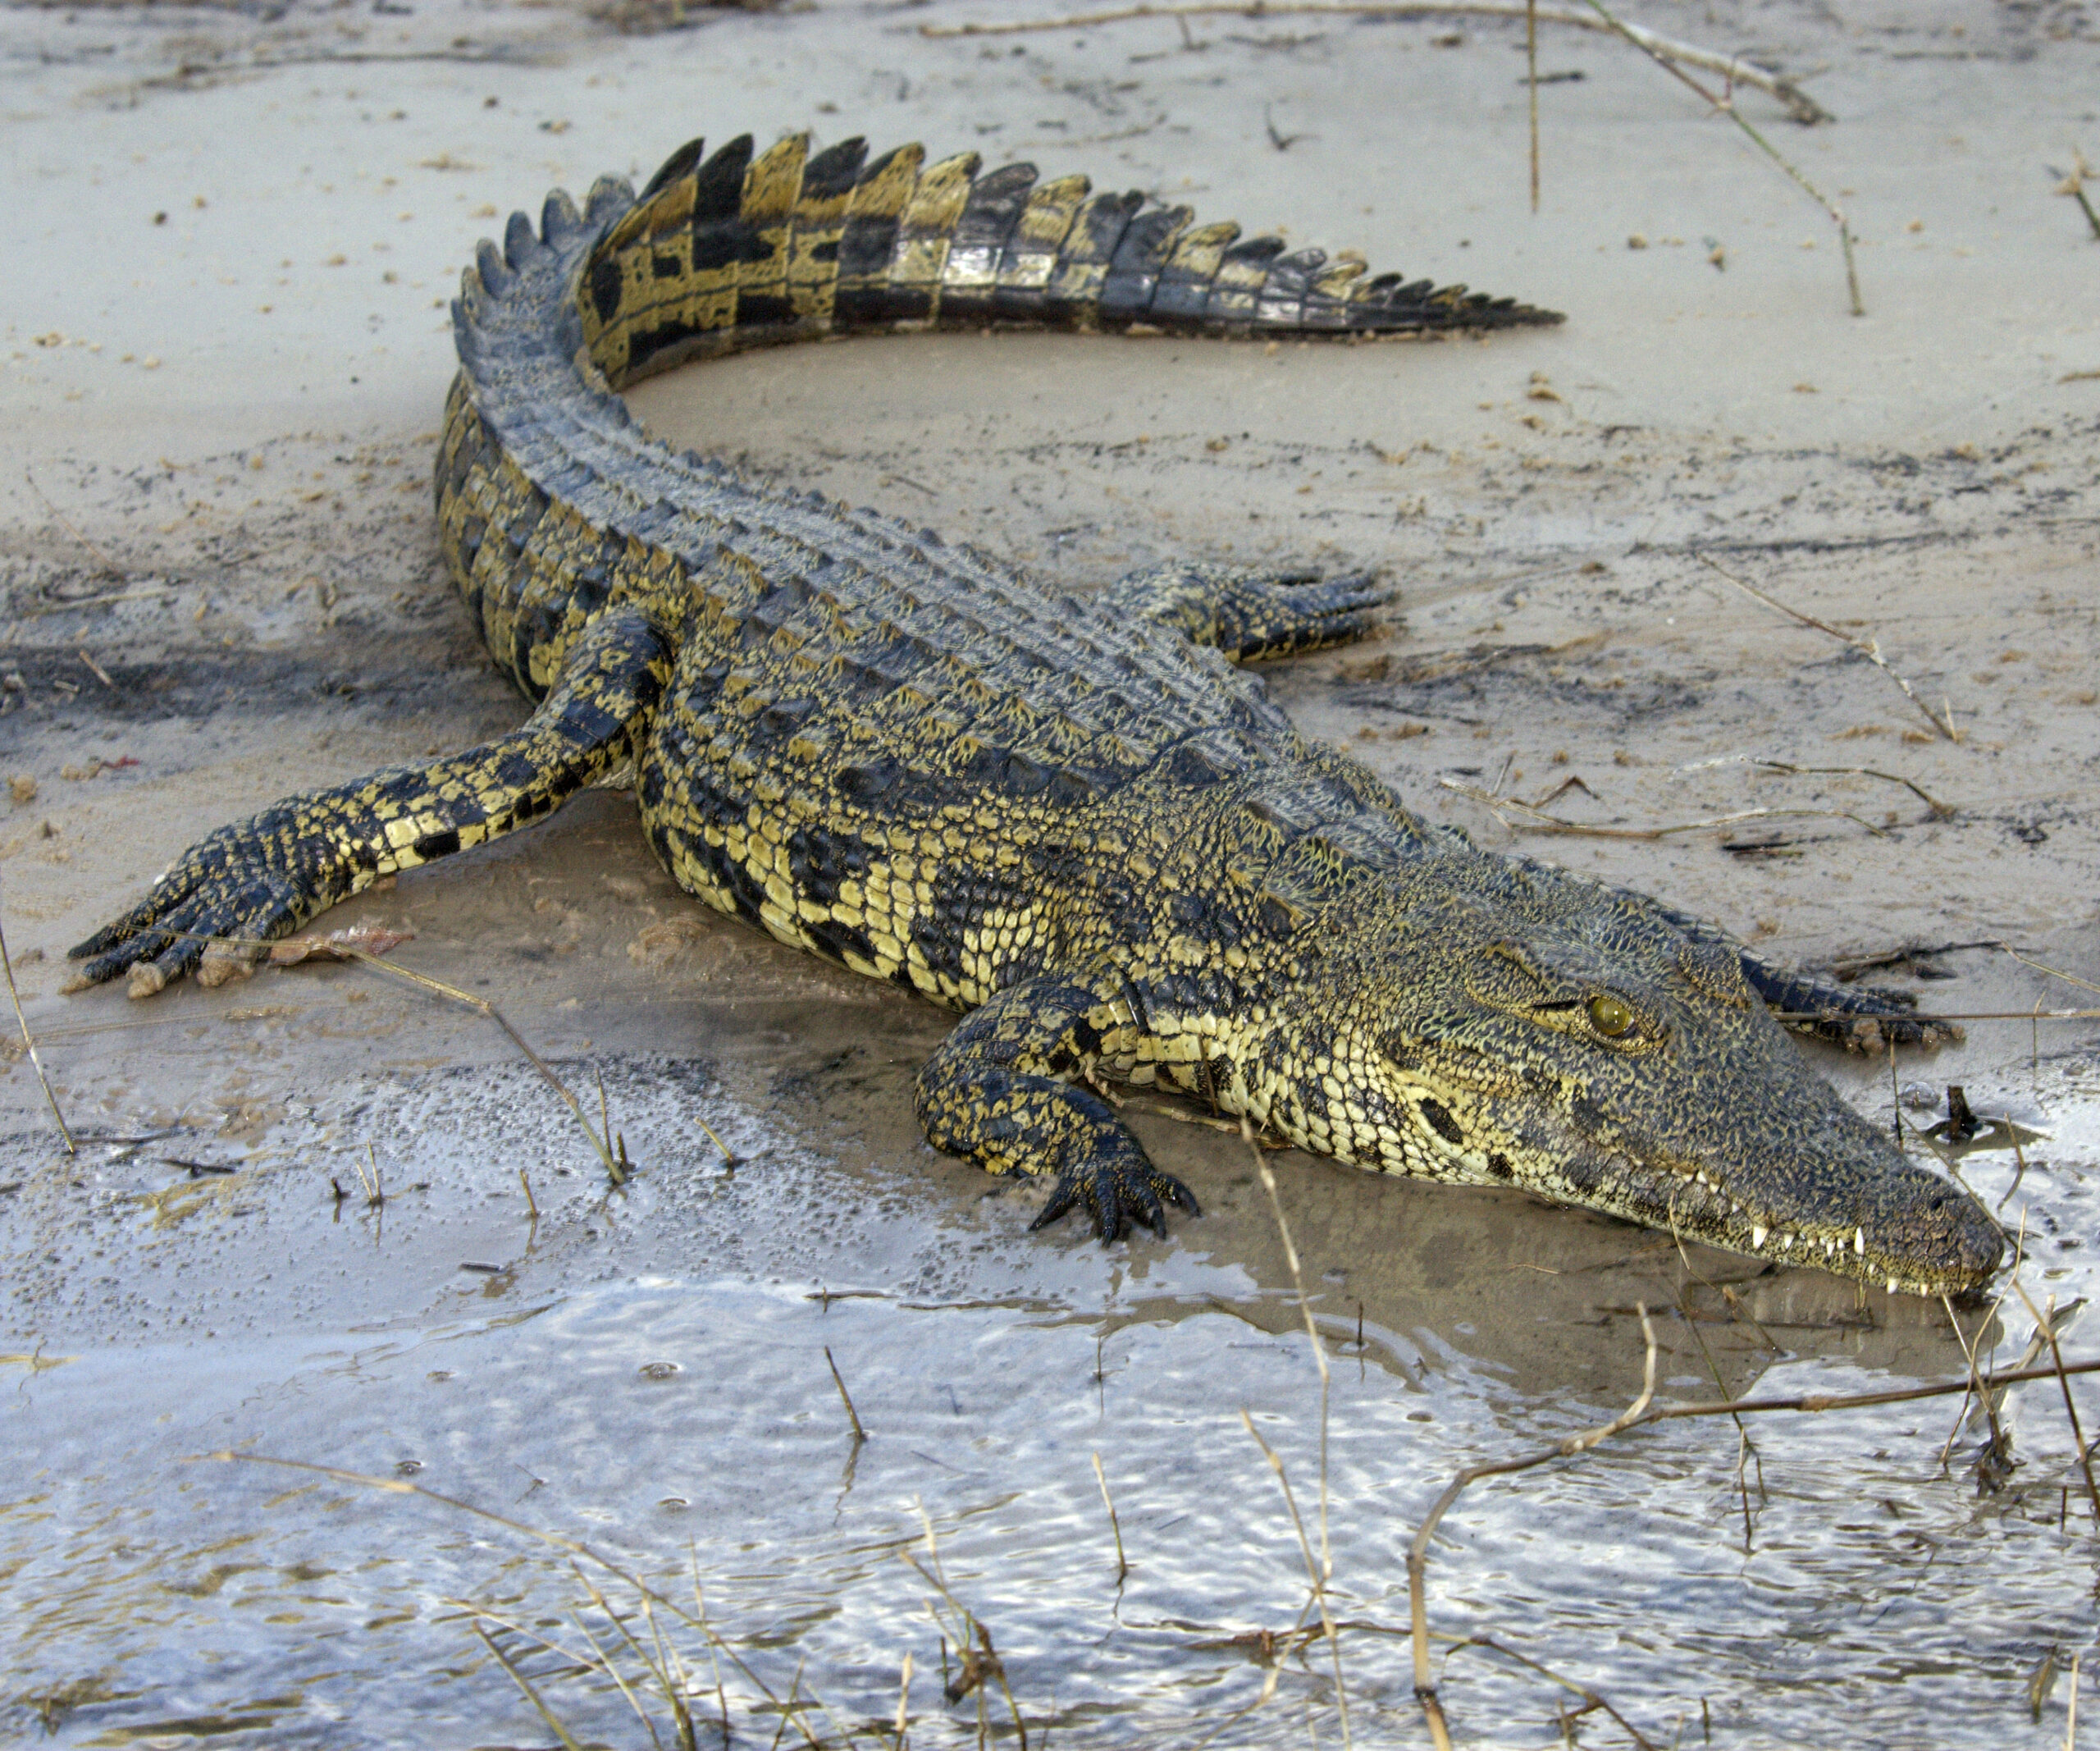 Woman snatched by crocodile in Queensland